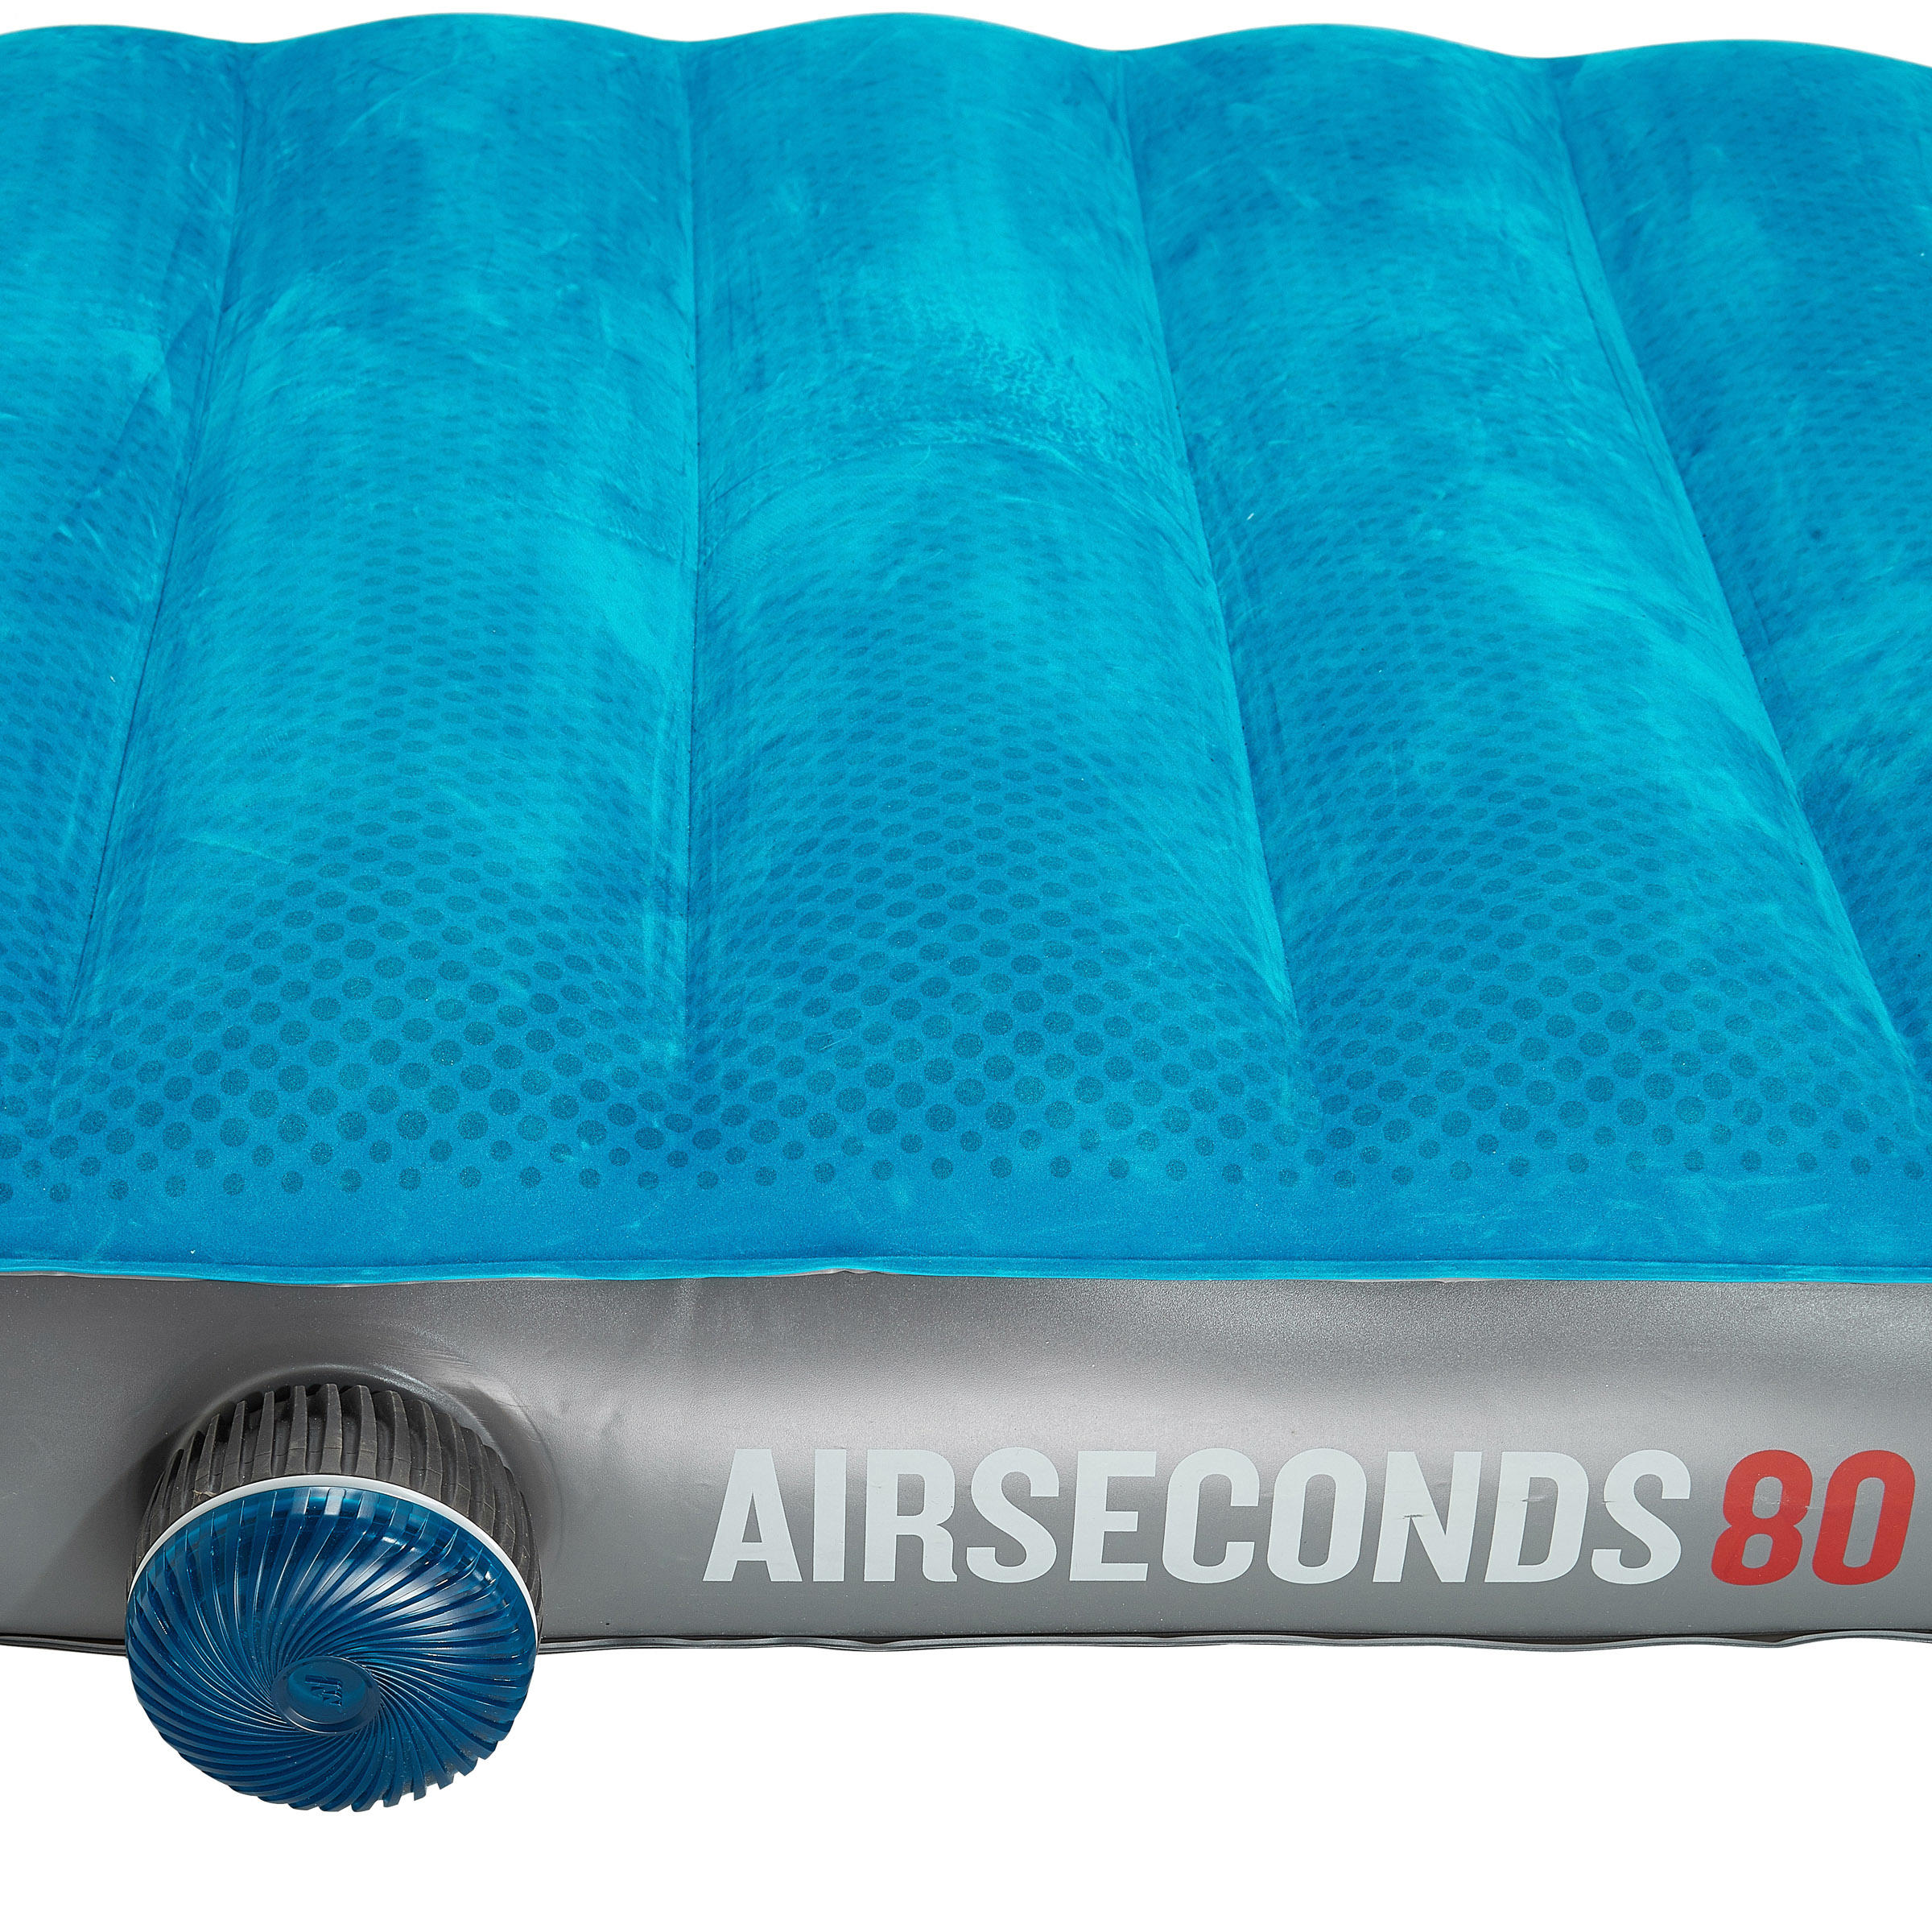 INFLATABLE CAMPING MATTRESS AIR SECONDS 80 CM 1 PERSON 7/12